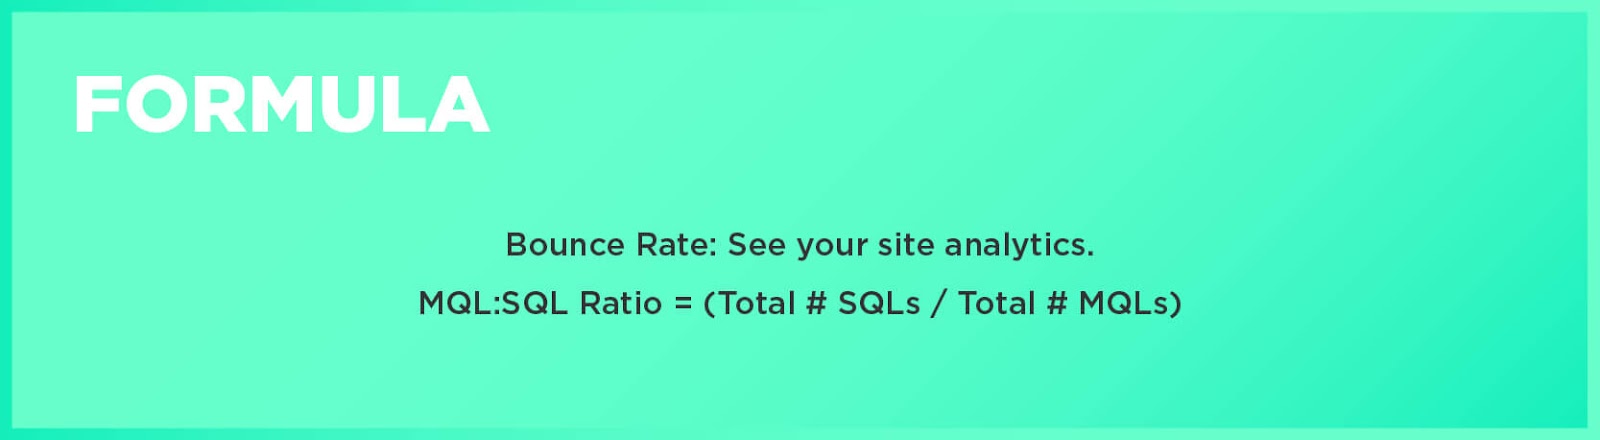 Formula: Bounce Rate: See your site analytics.  Formula: MQL:SQL Ratio = (Total # SQLs / Total # MQLs)